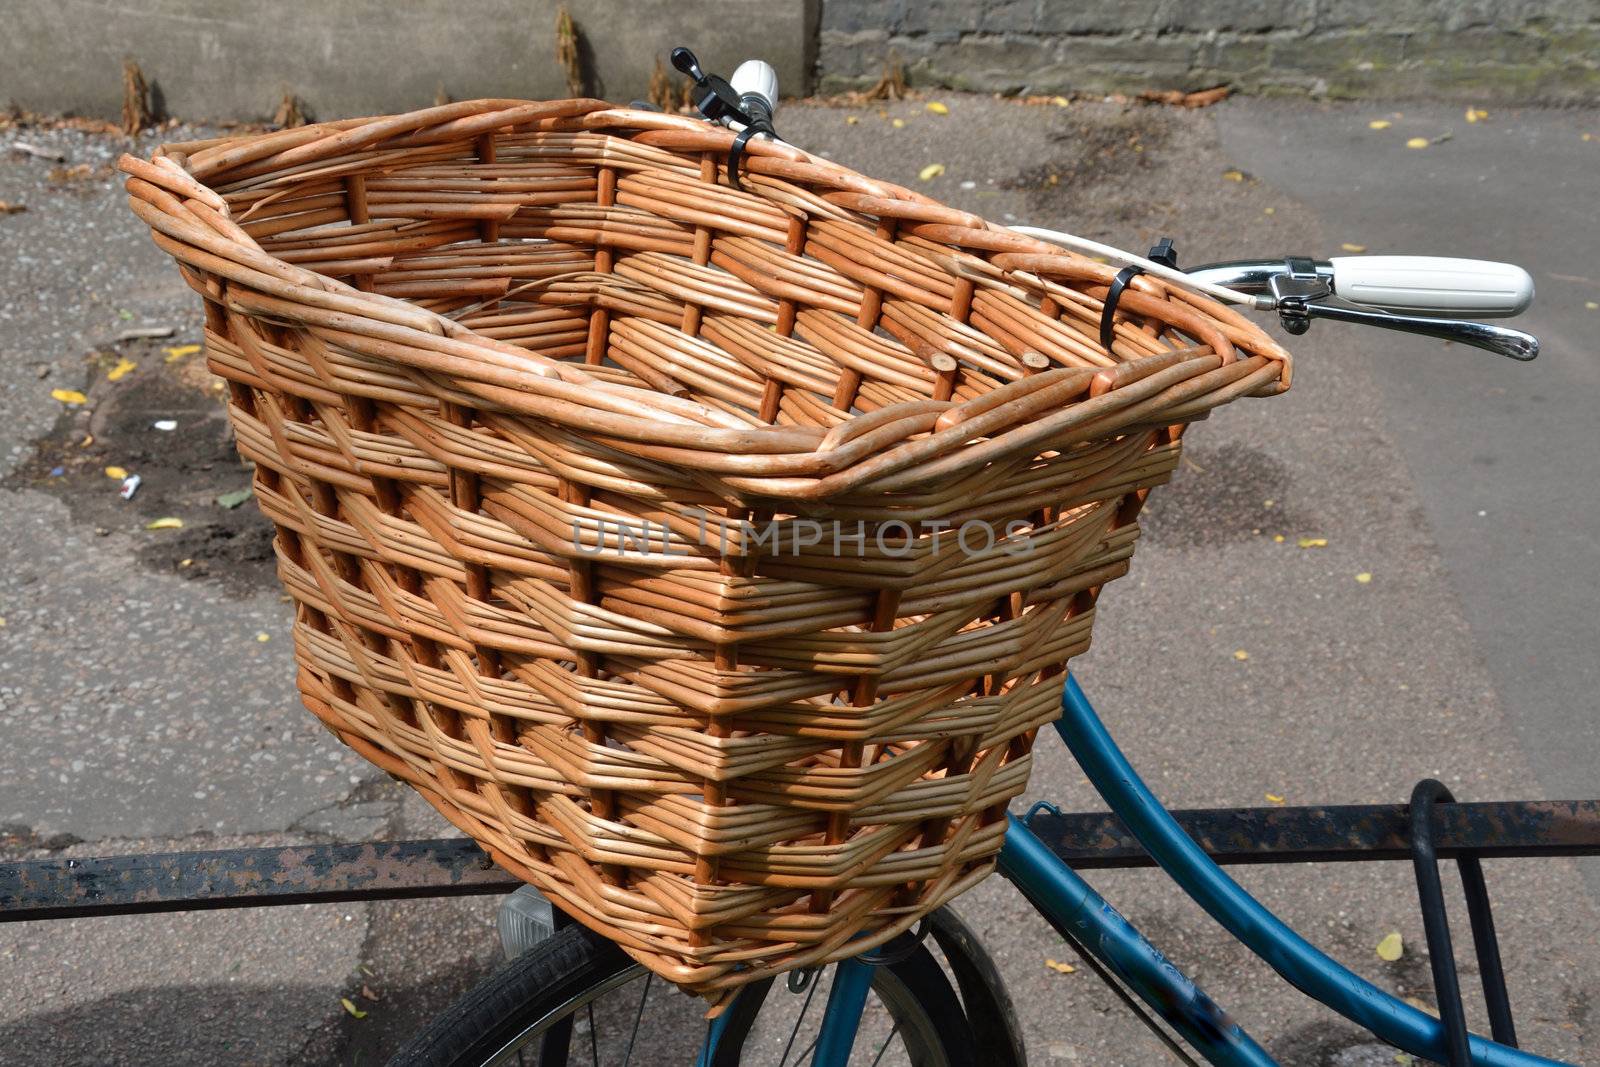 Bicycle with empty wicker panier